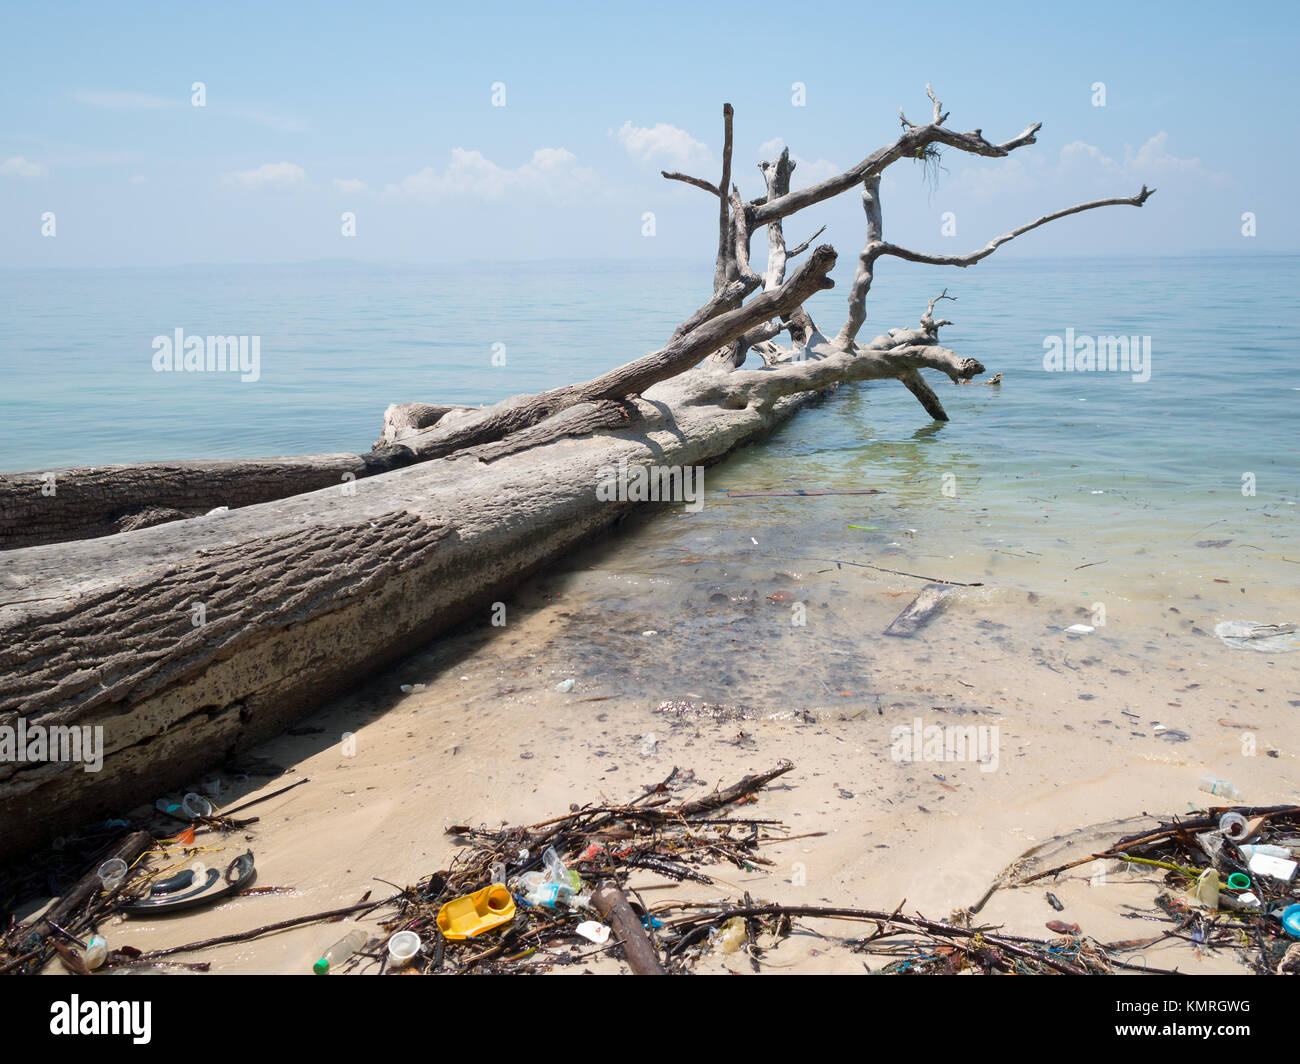 Plastic litter in the sea by a fallen tree in Elephant beach, Havelock Stock Photo